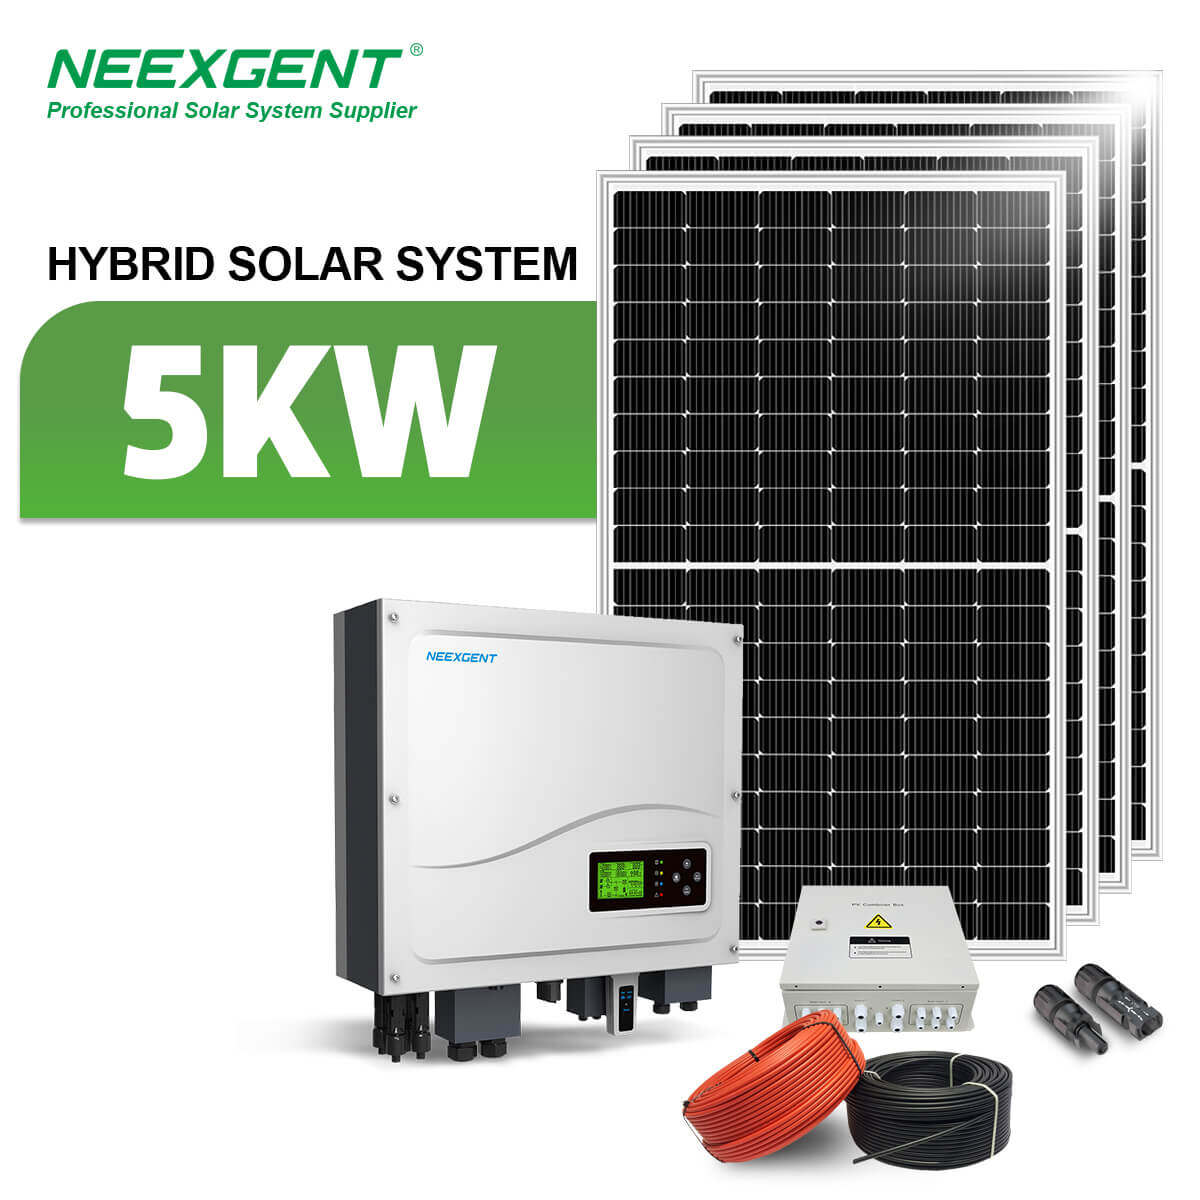 Neexgent Hybrid Solar System 5kw Home Use Solar Energy System With Lithium Batteries